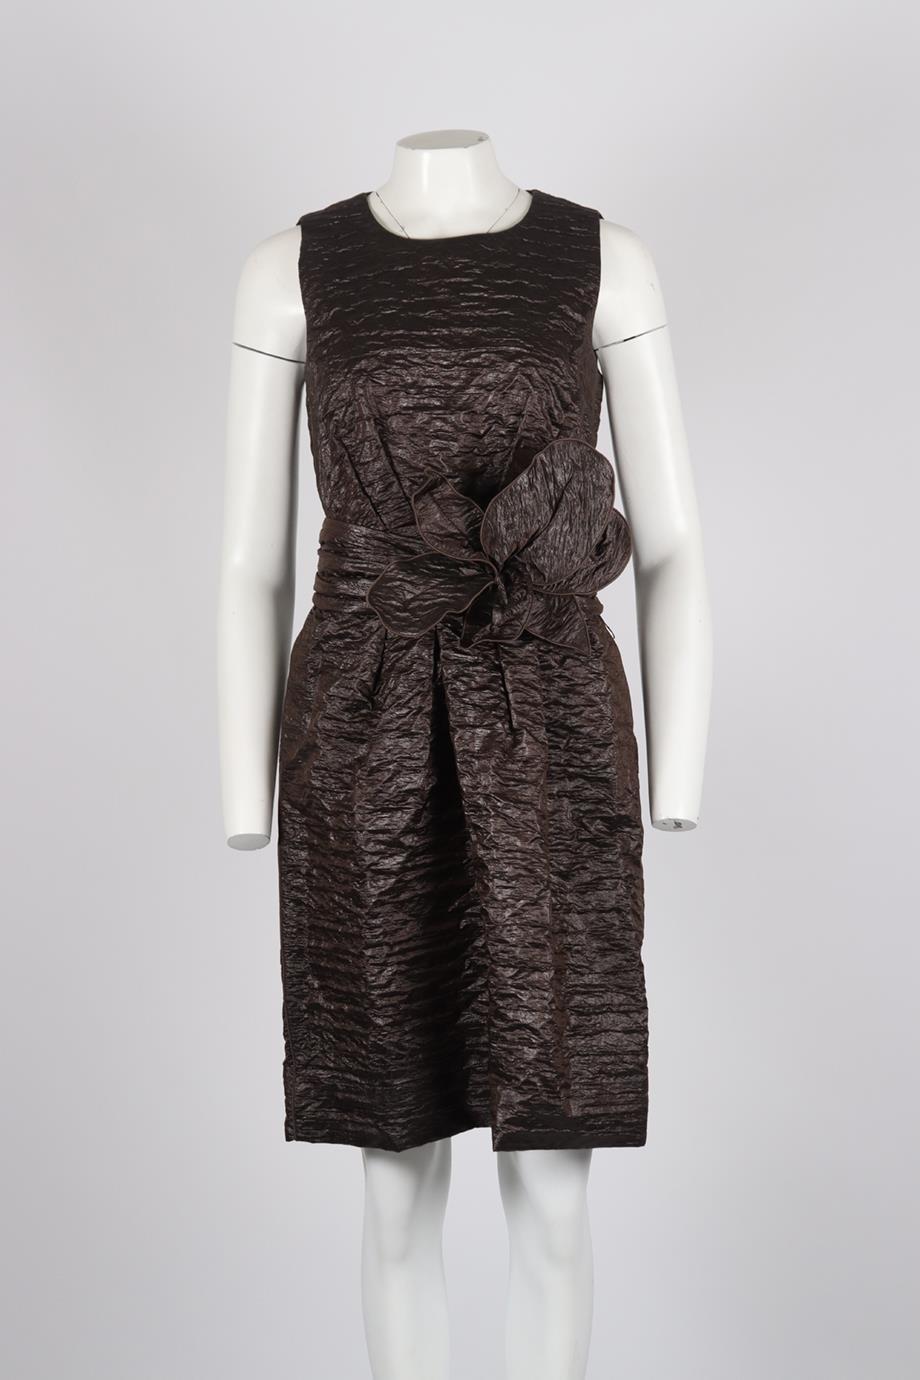 Marc Jacobs Belted Silk Lame Dress. Brown. Sleeveless. Crewneck. Zip fastening - Back. 74% Silk , 26% polyamide; lining: 100% silk. US 6 (UK 10, FR 38, IT 42). Bust: 35 in. Waist: 30 in. Hips: 47 in. Length: 39 in. Condition: Used. Very good